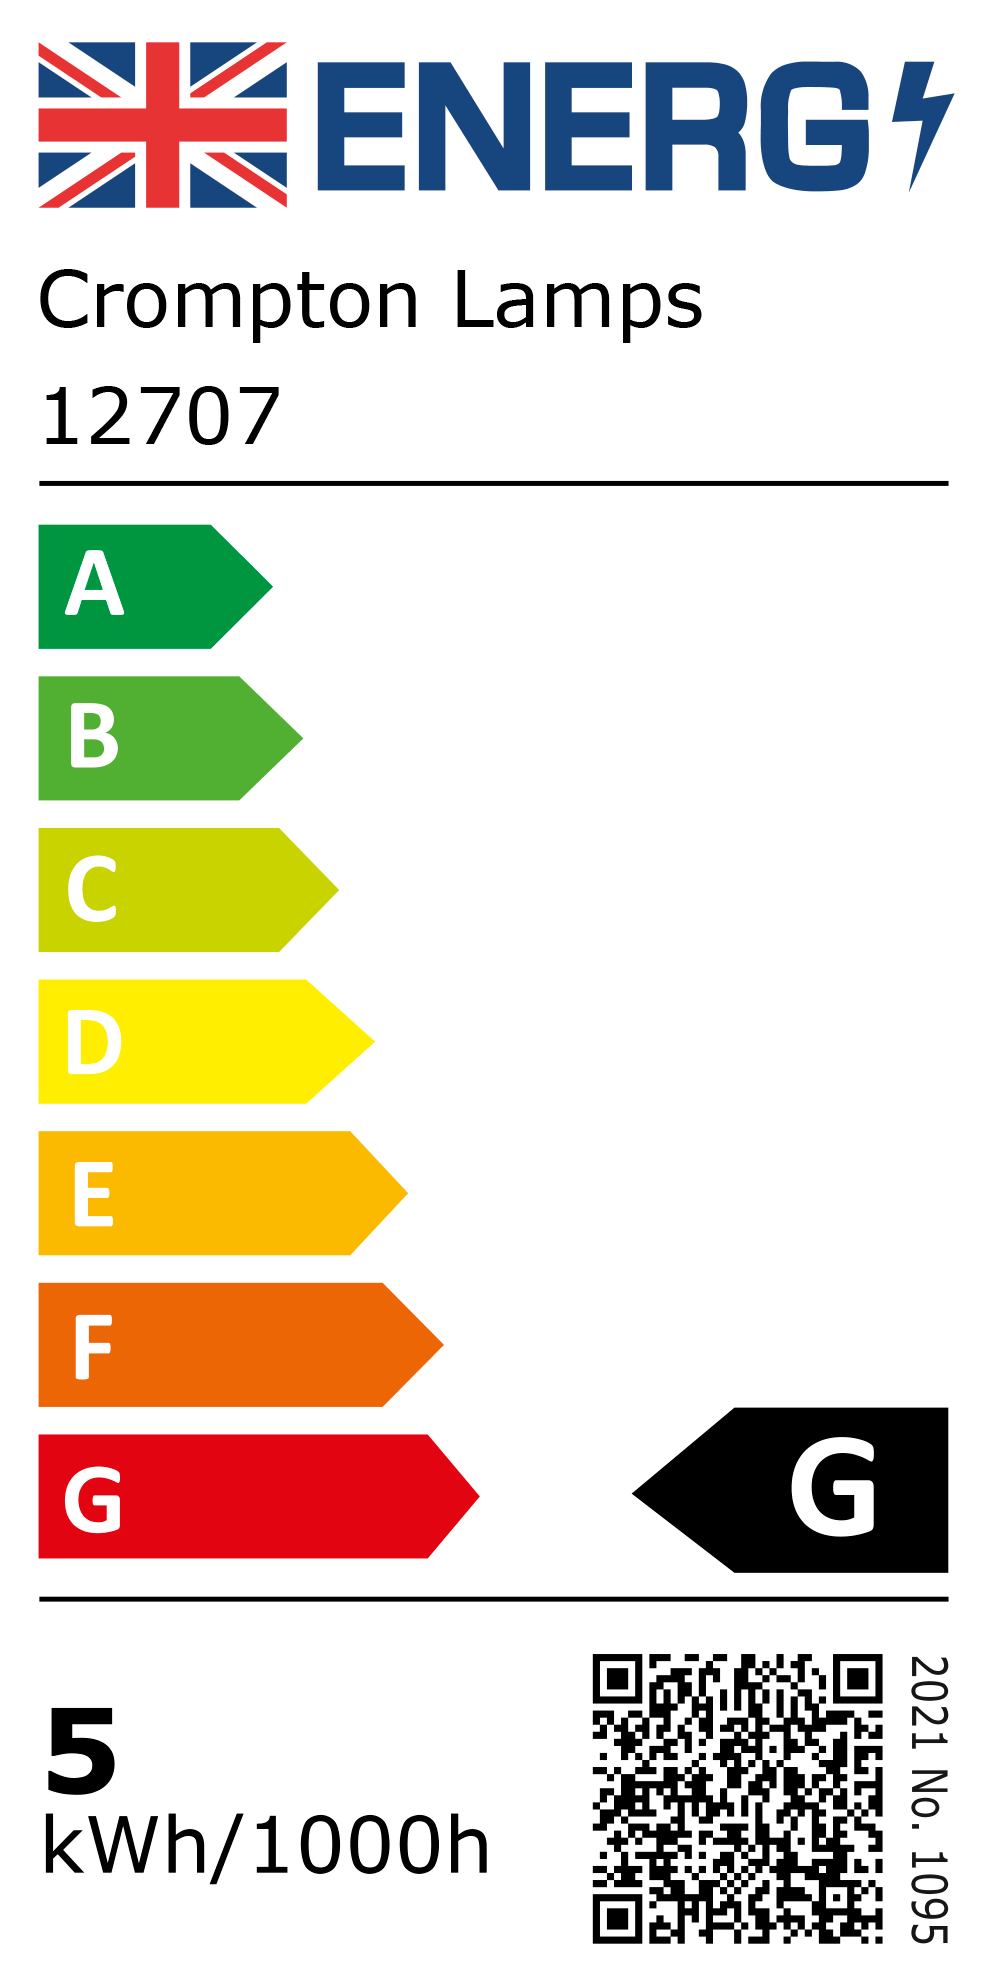 New 2021 Energy Rating Label: Stock Code 12707